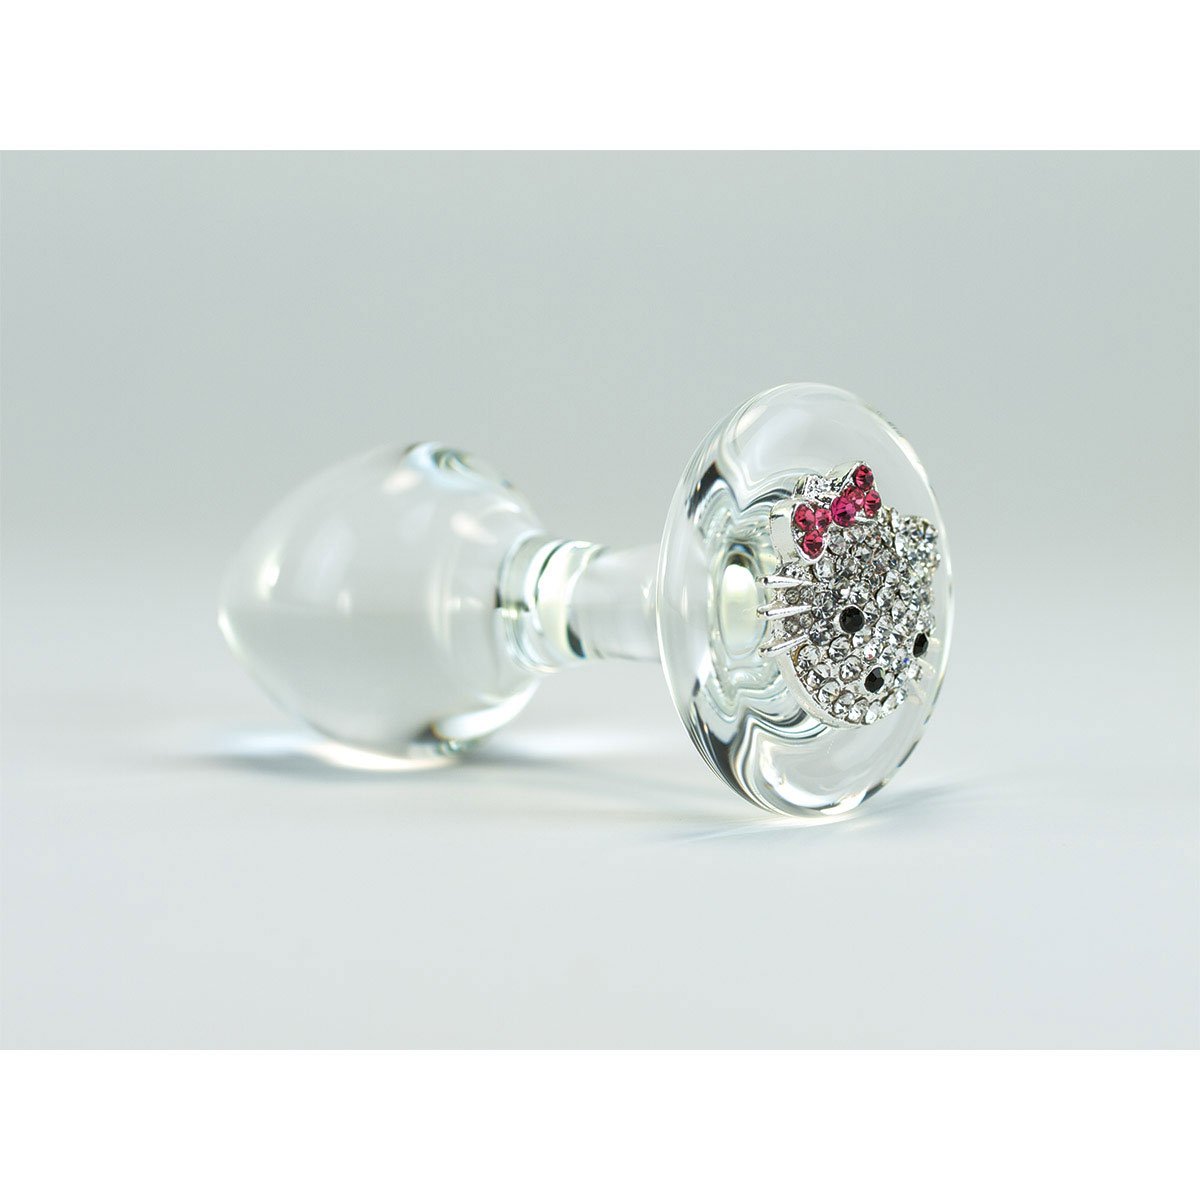 Crystal Delights Kitty Plug - Buy At Luxury Toy X - Free 3-Day Shipping